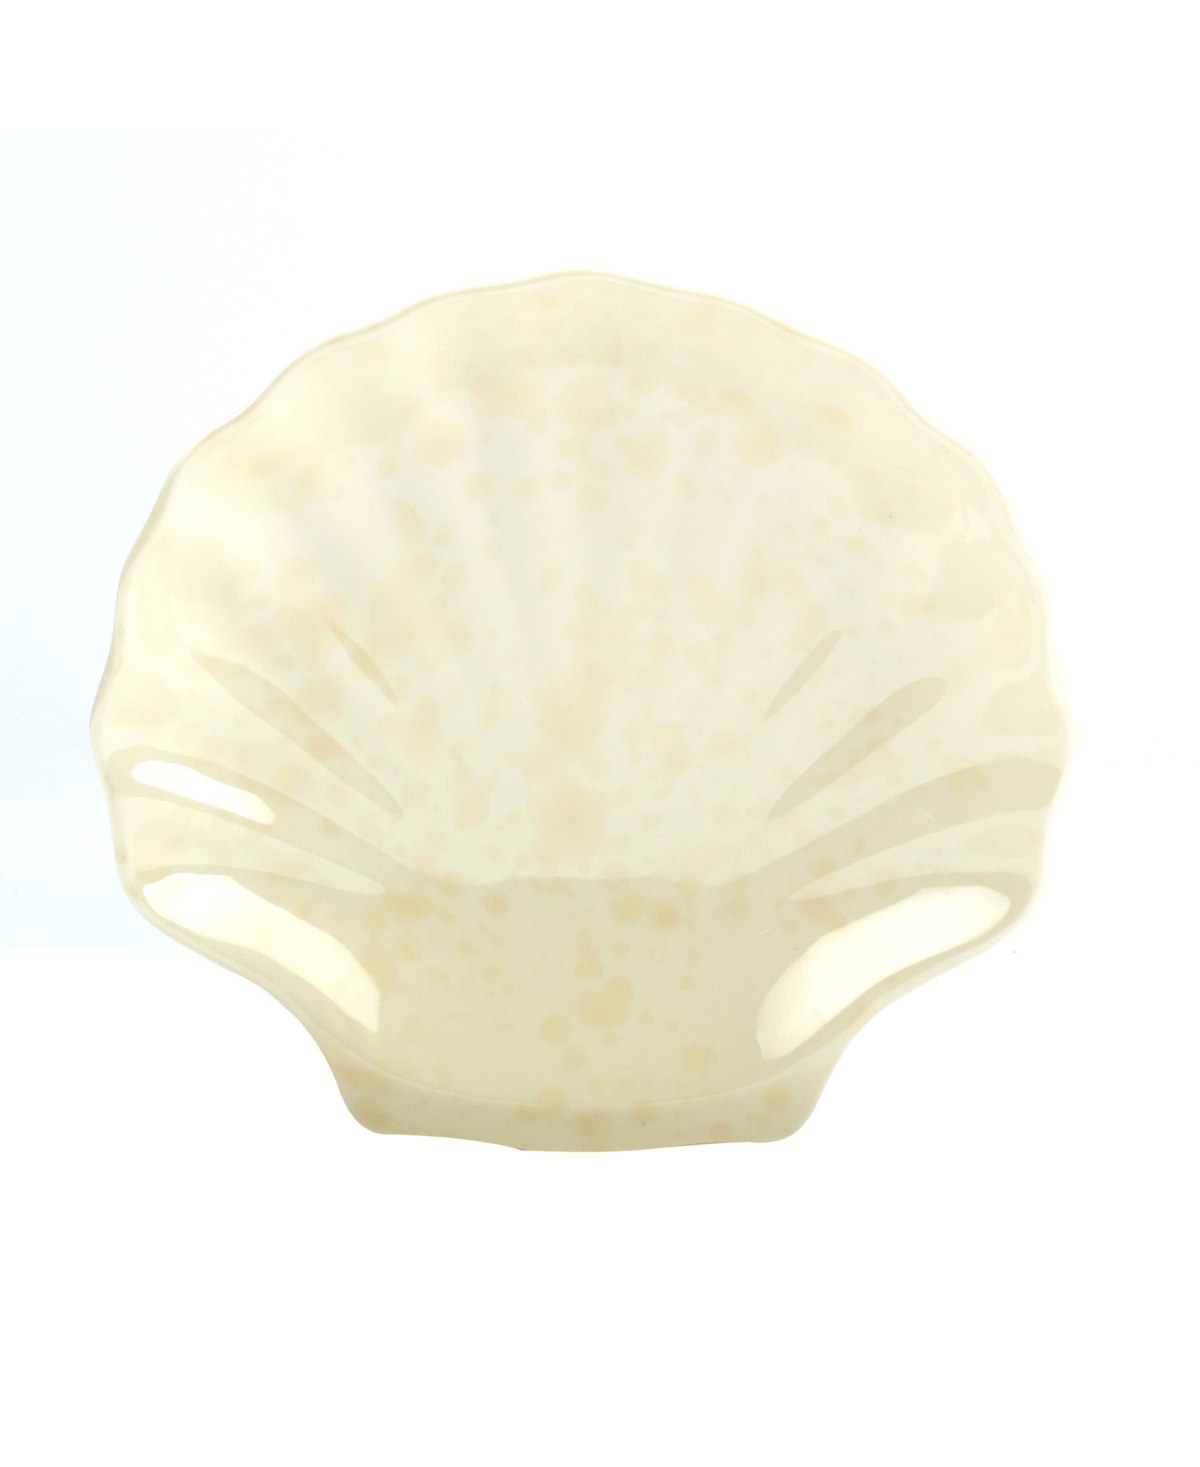 Certified International 3-d Scallop Set Of 6 Shell Candy Plate, Service For 6 In Miscellaneous